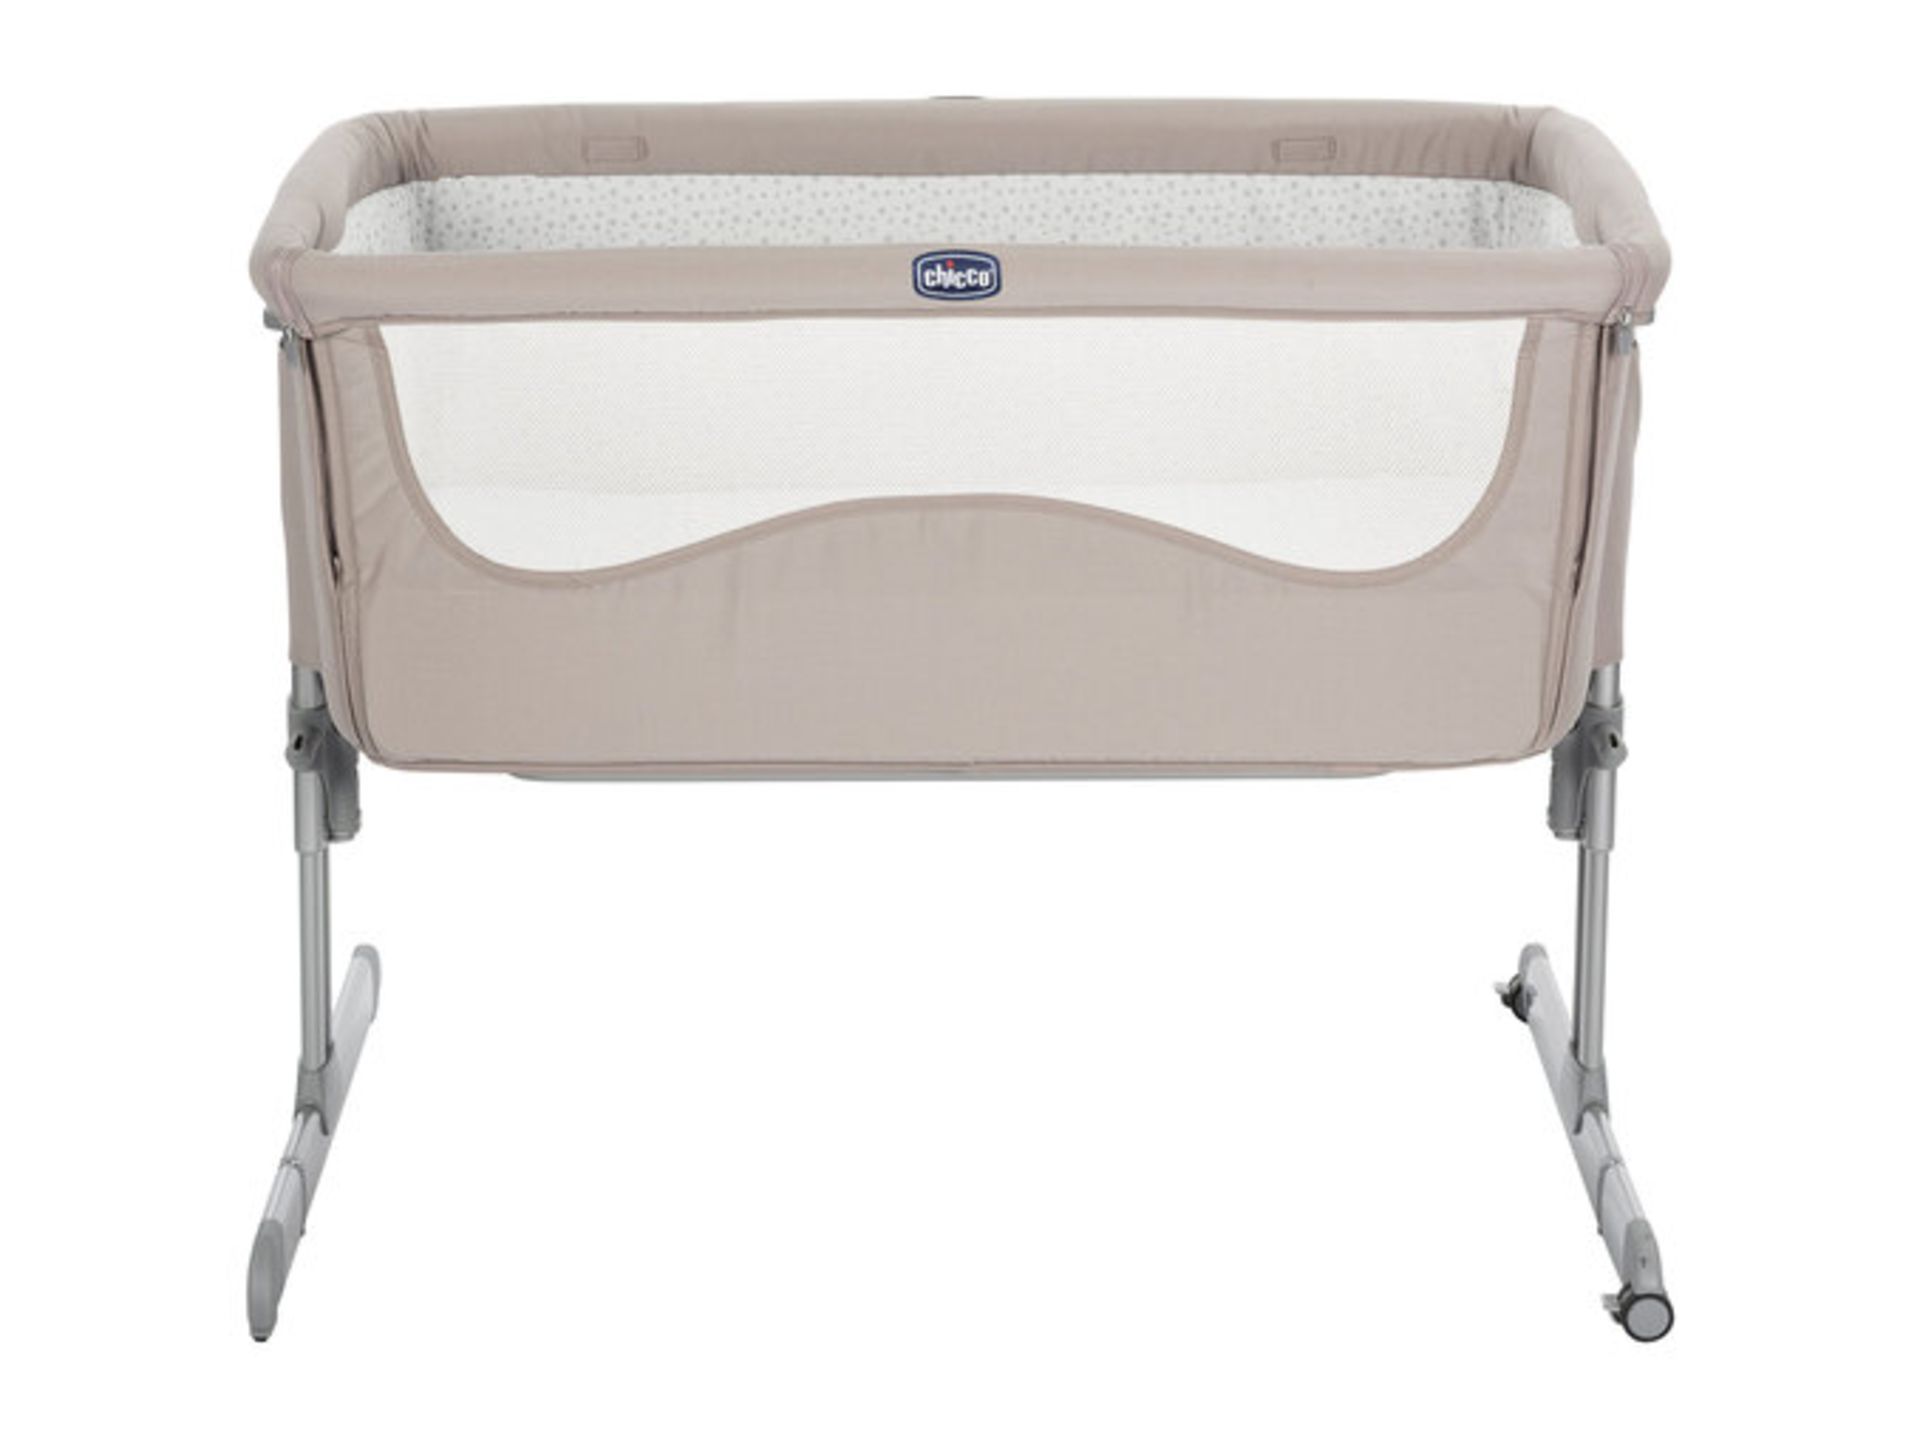 1 x CHICCO Next2me 'Chick to Chick' Bedside Baby Crib With Mattress - New Sealed Stock - RRP £299.00 - Image 4 of 8